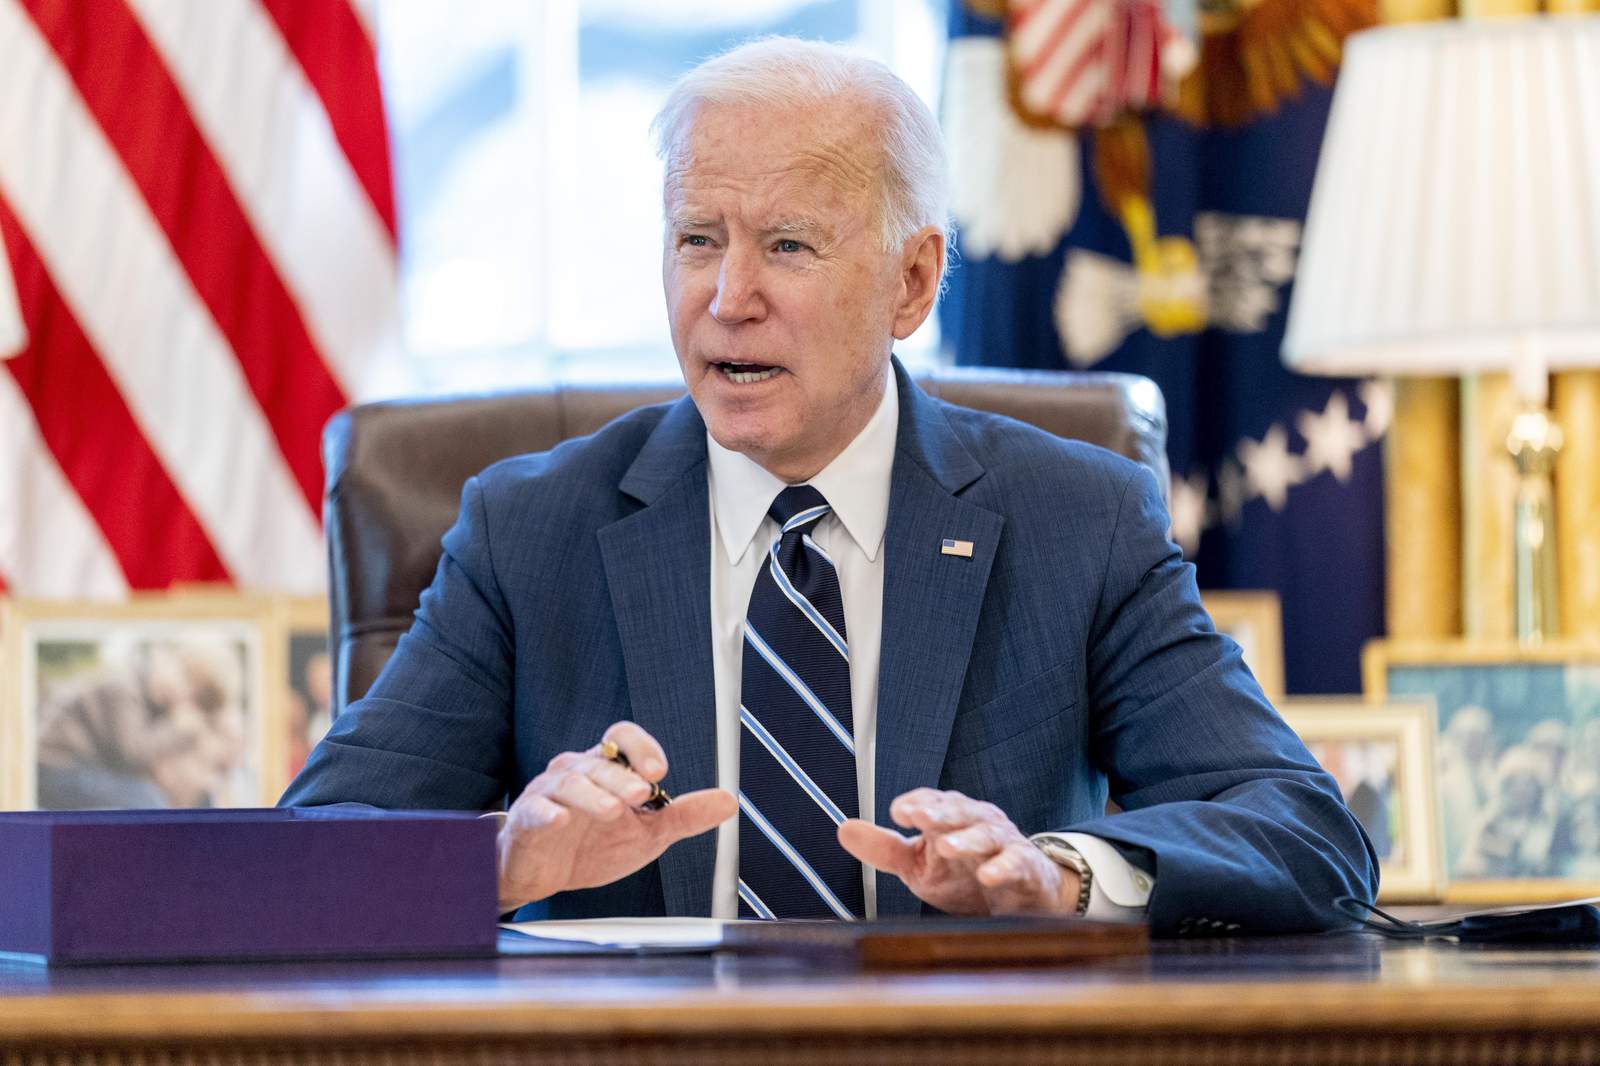 President Biden sets May 1 target to have all adults vaccine-eligible